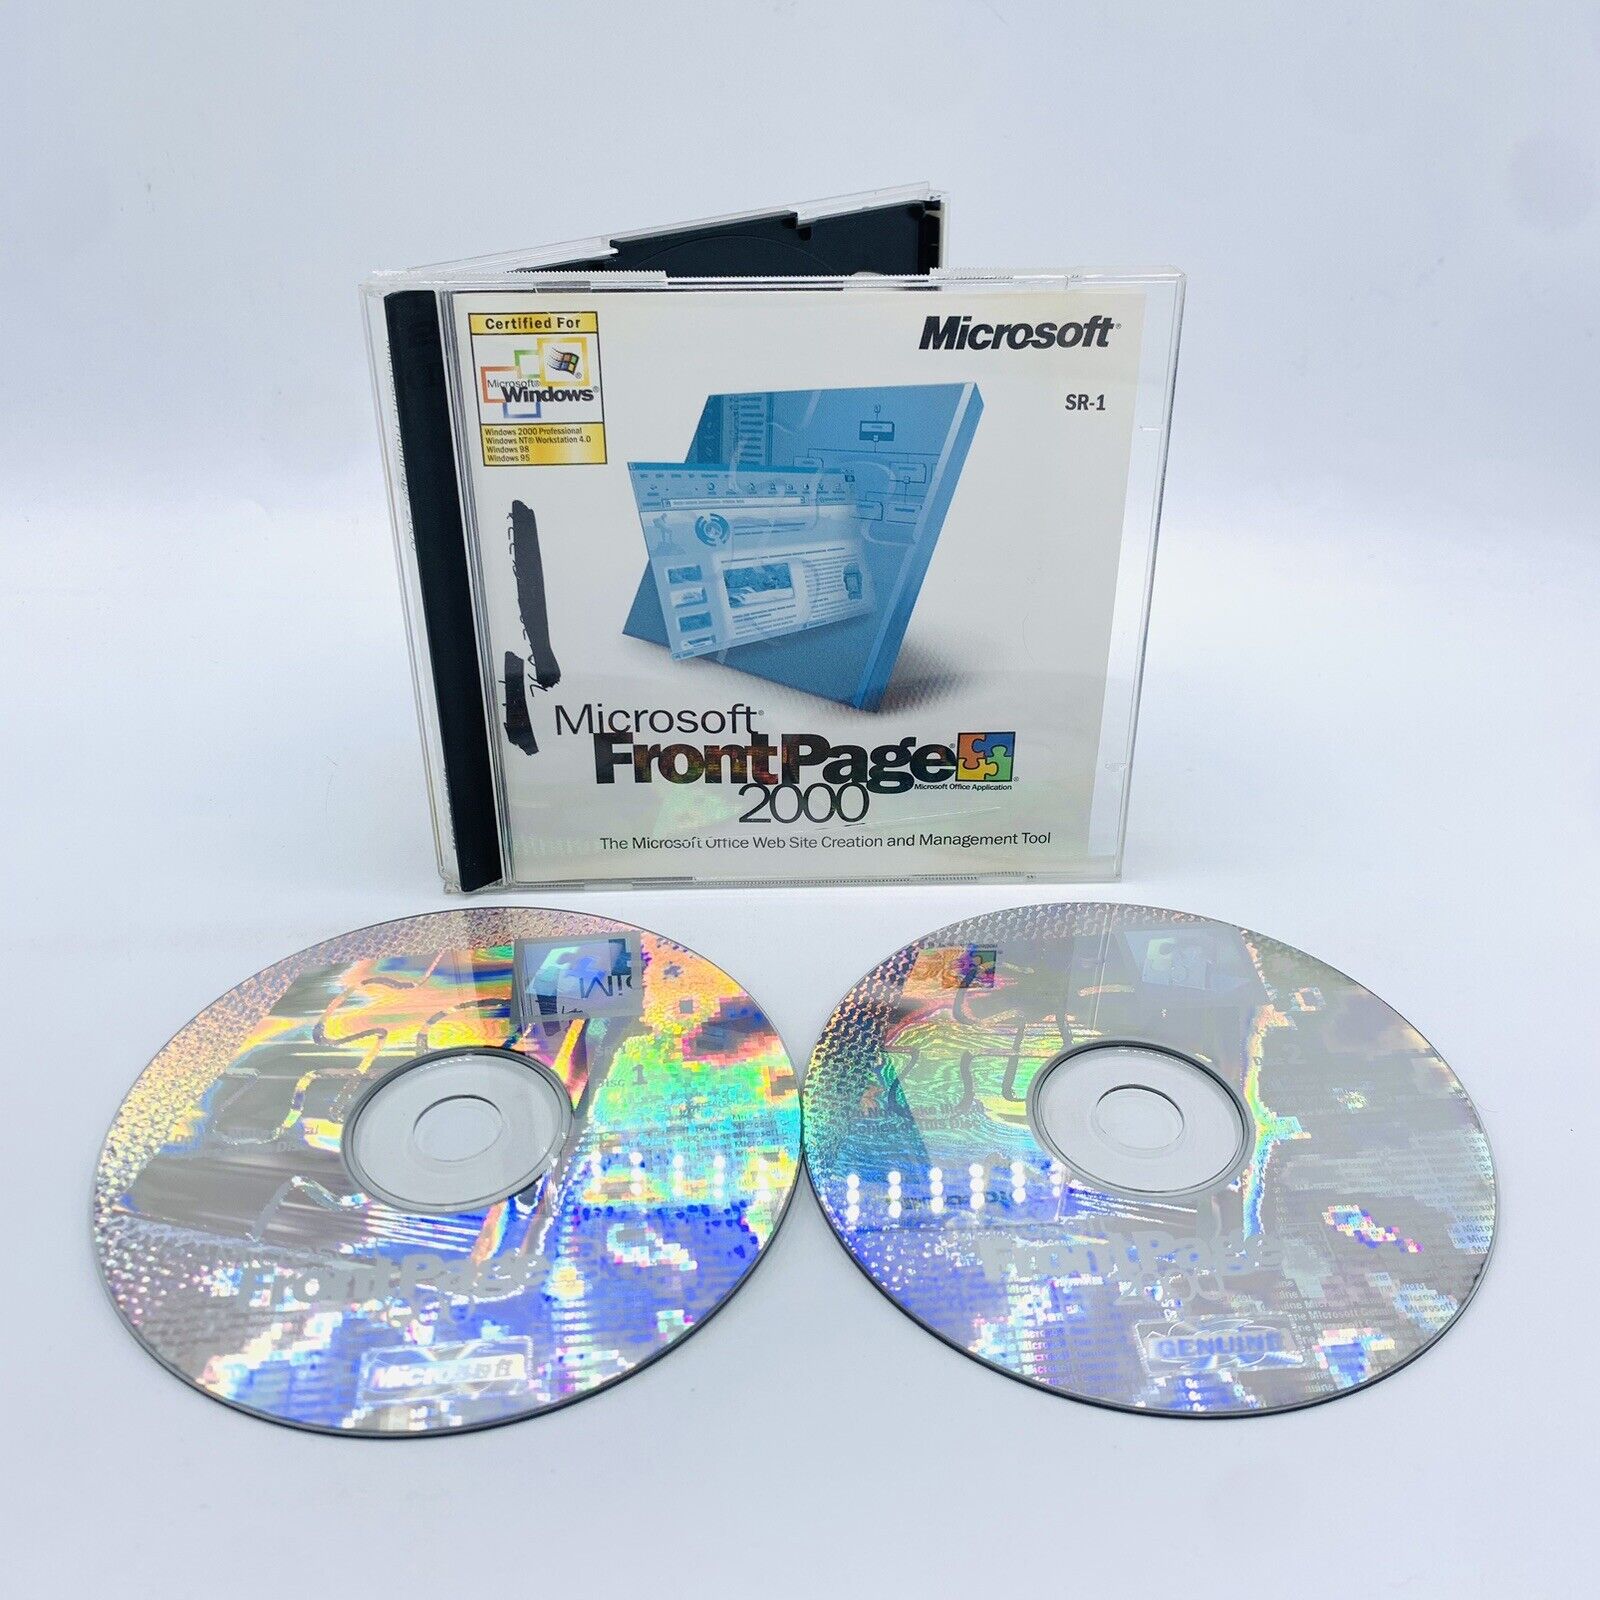 Microsoft FrontPage 2000 SR-1 For Windows PC 2-Disc Set w/ Key Tested Front Page